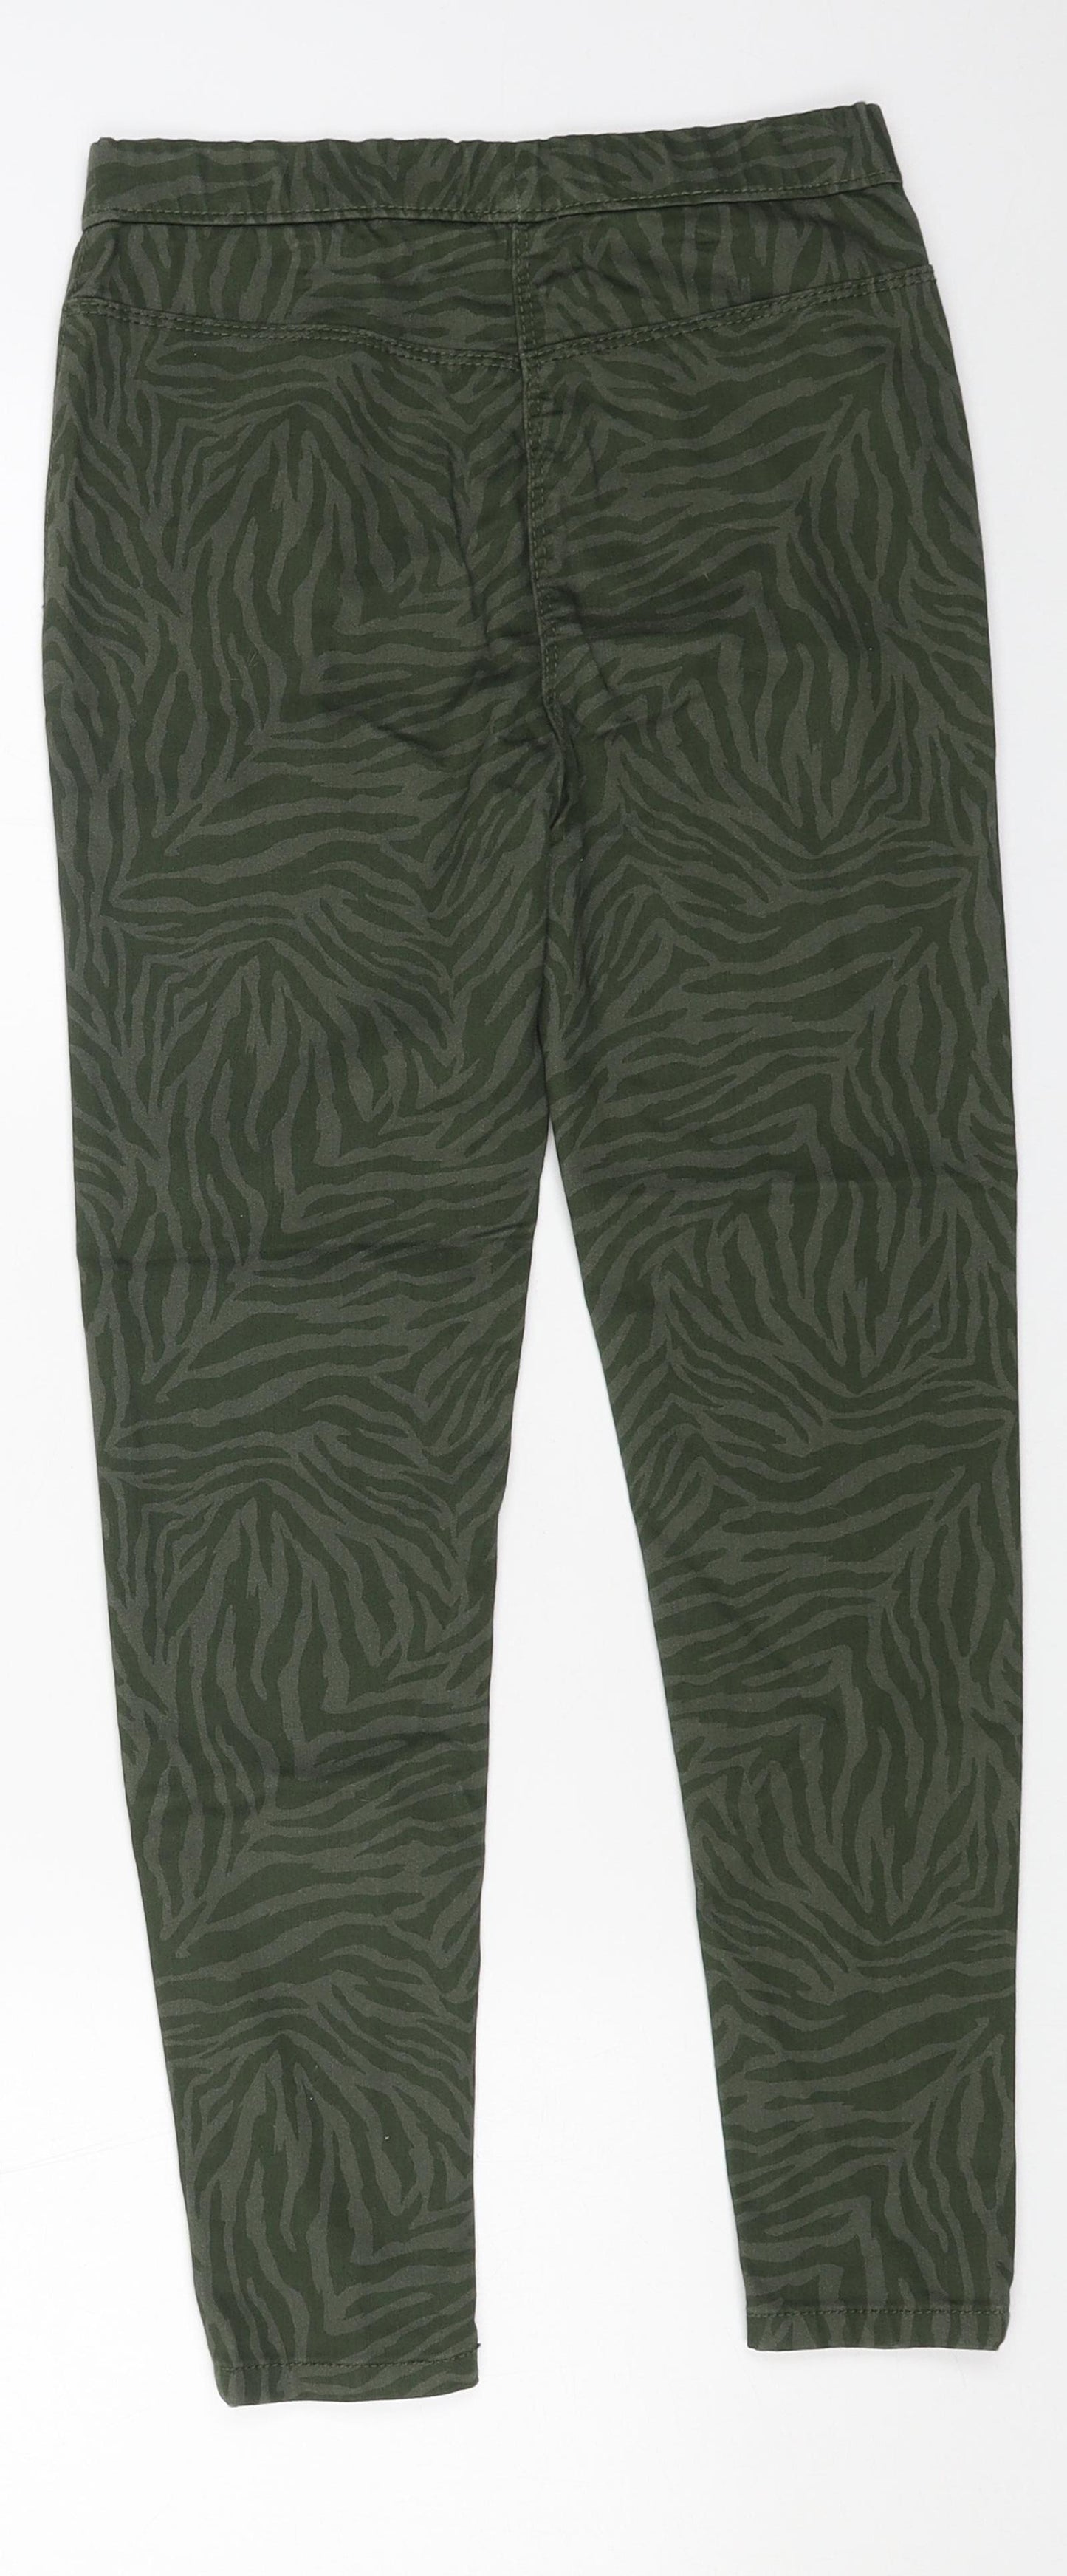 George Girls Green Animal Print Cotton Jegging Jeans Size 9-10 Years L23 in Regular Pullover - Tiger Print